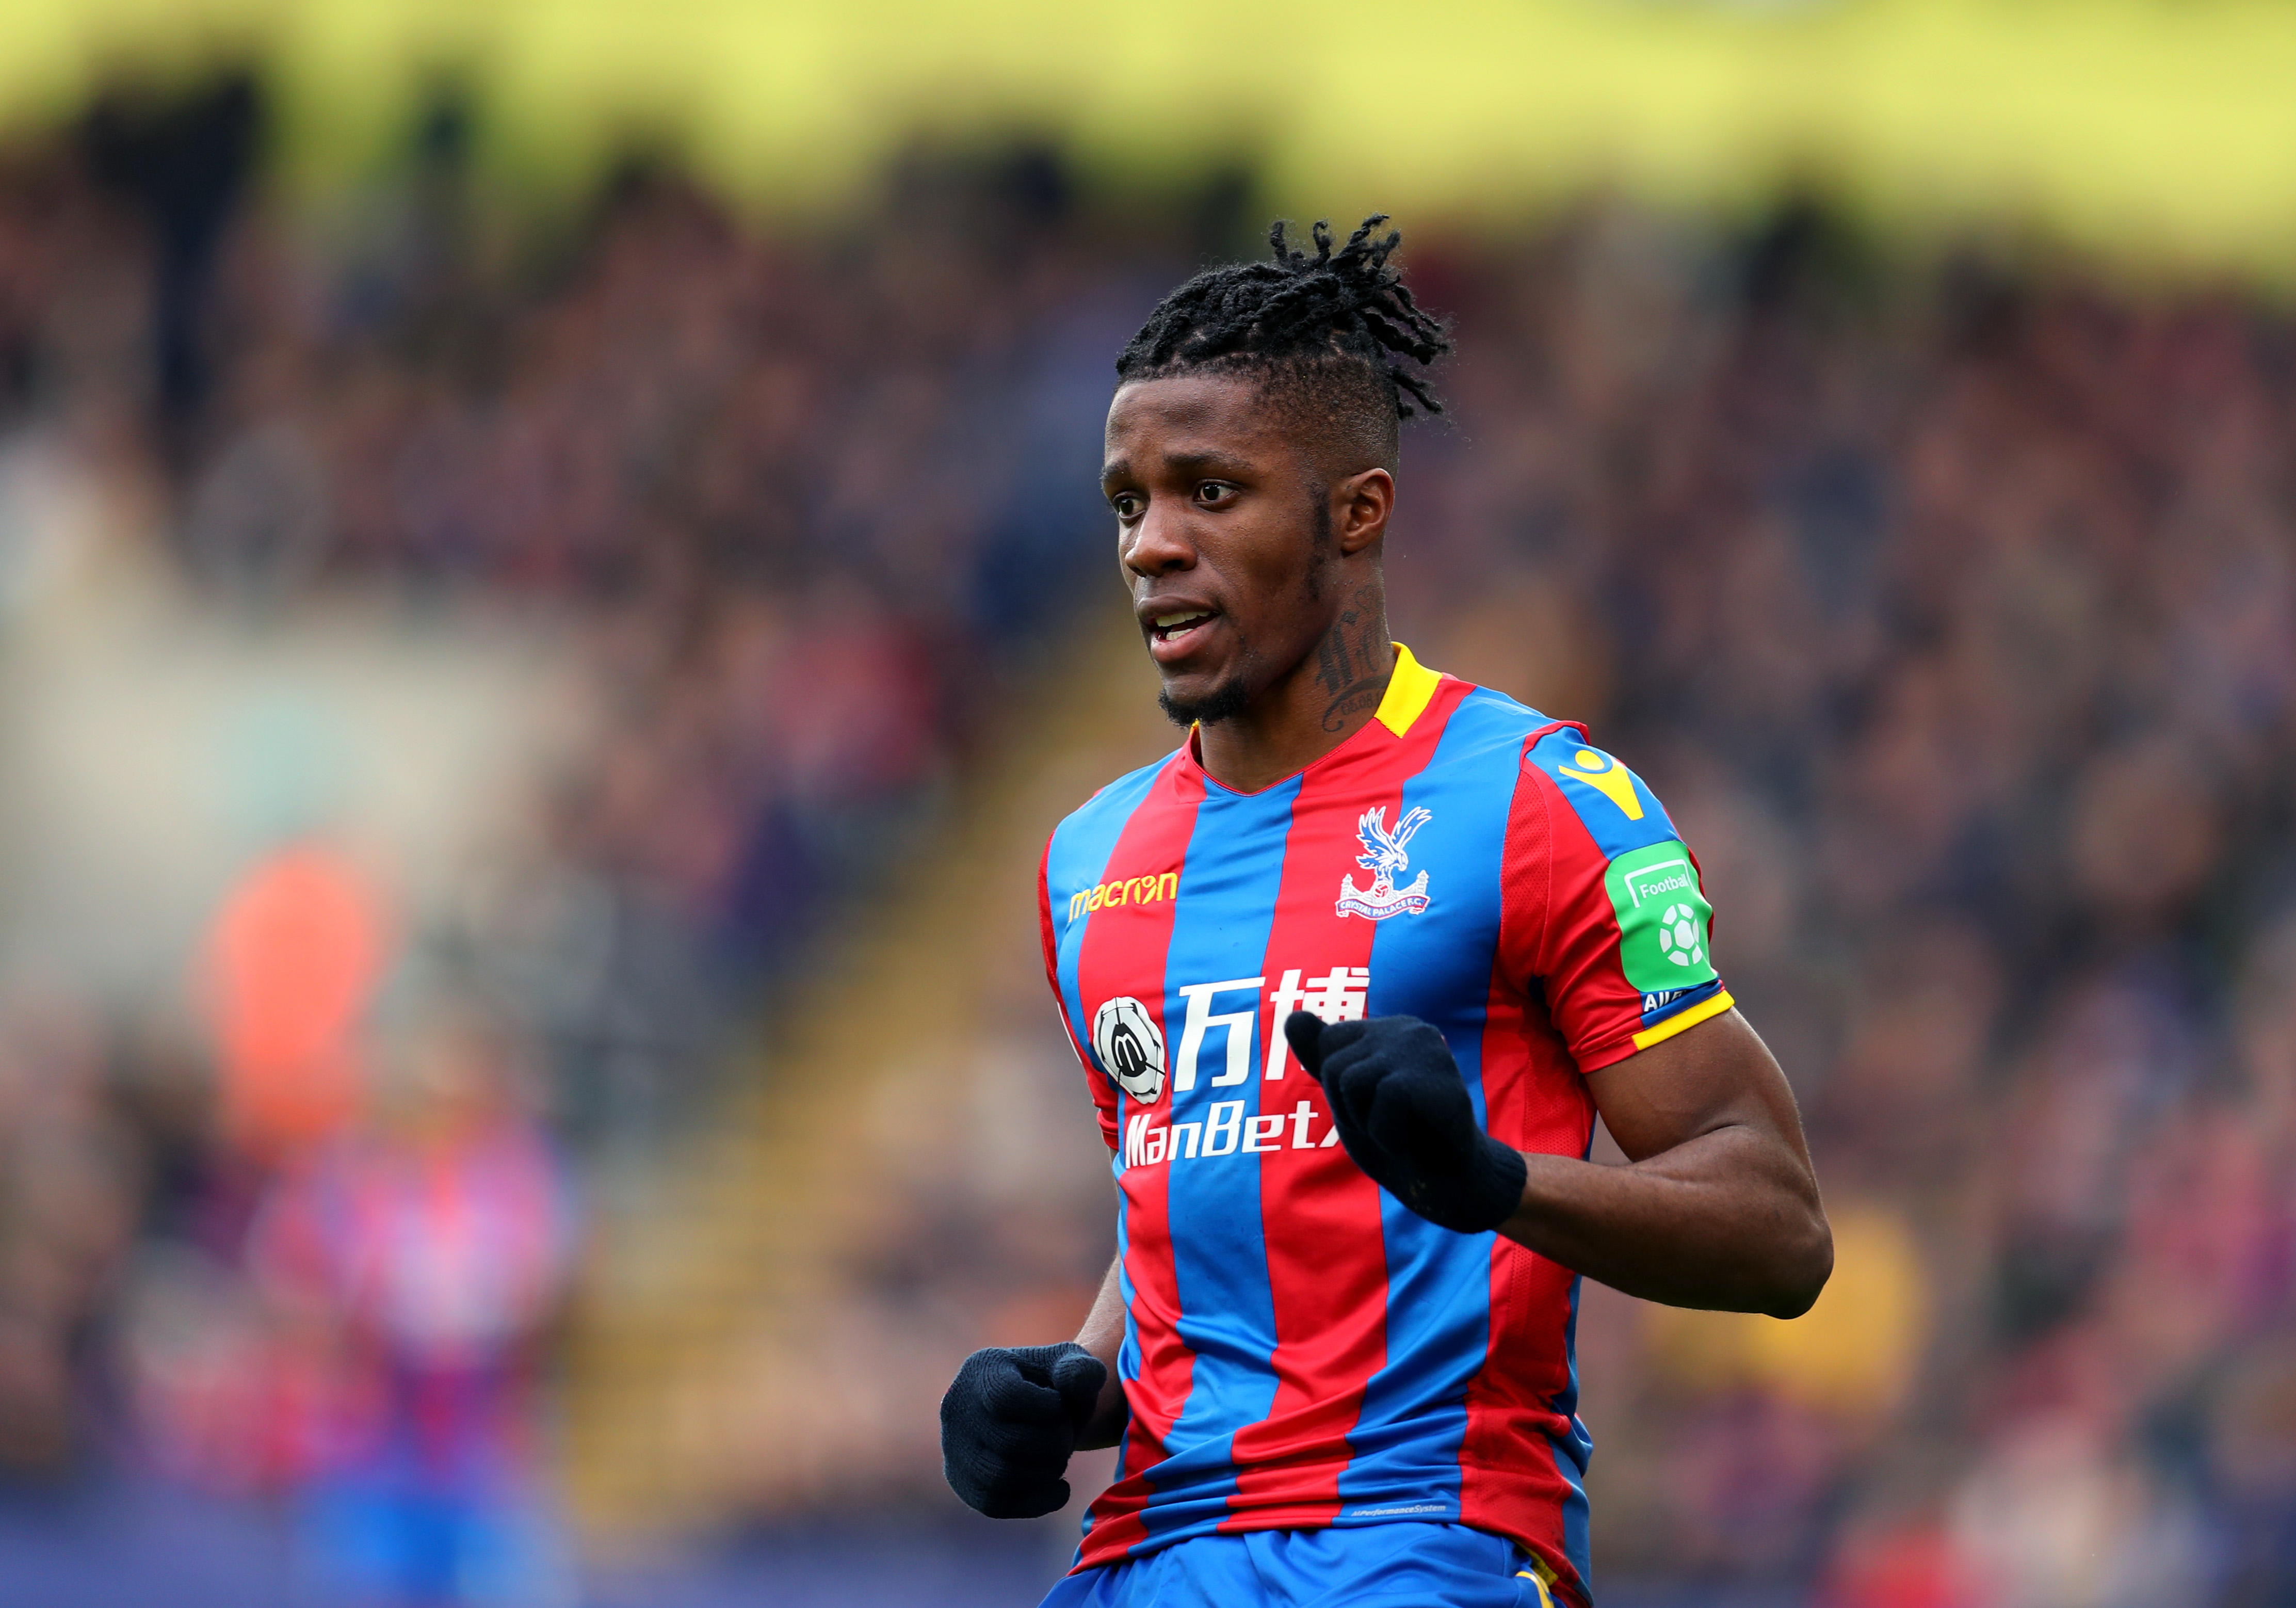 LONDON, ENGLAND - MARCH 31: Wilfried Zaha of Crystal Palace during the Premier League match between Crystal Palace and Liverpool at Selhurst Park on March 31, 2018 in London, England. (Photo by Catherine Ivill/Getty Images)